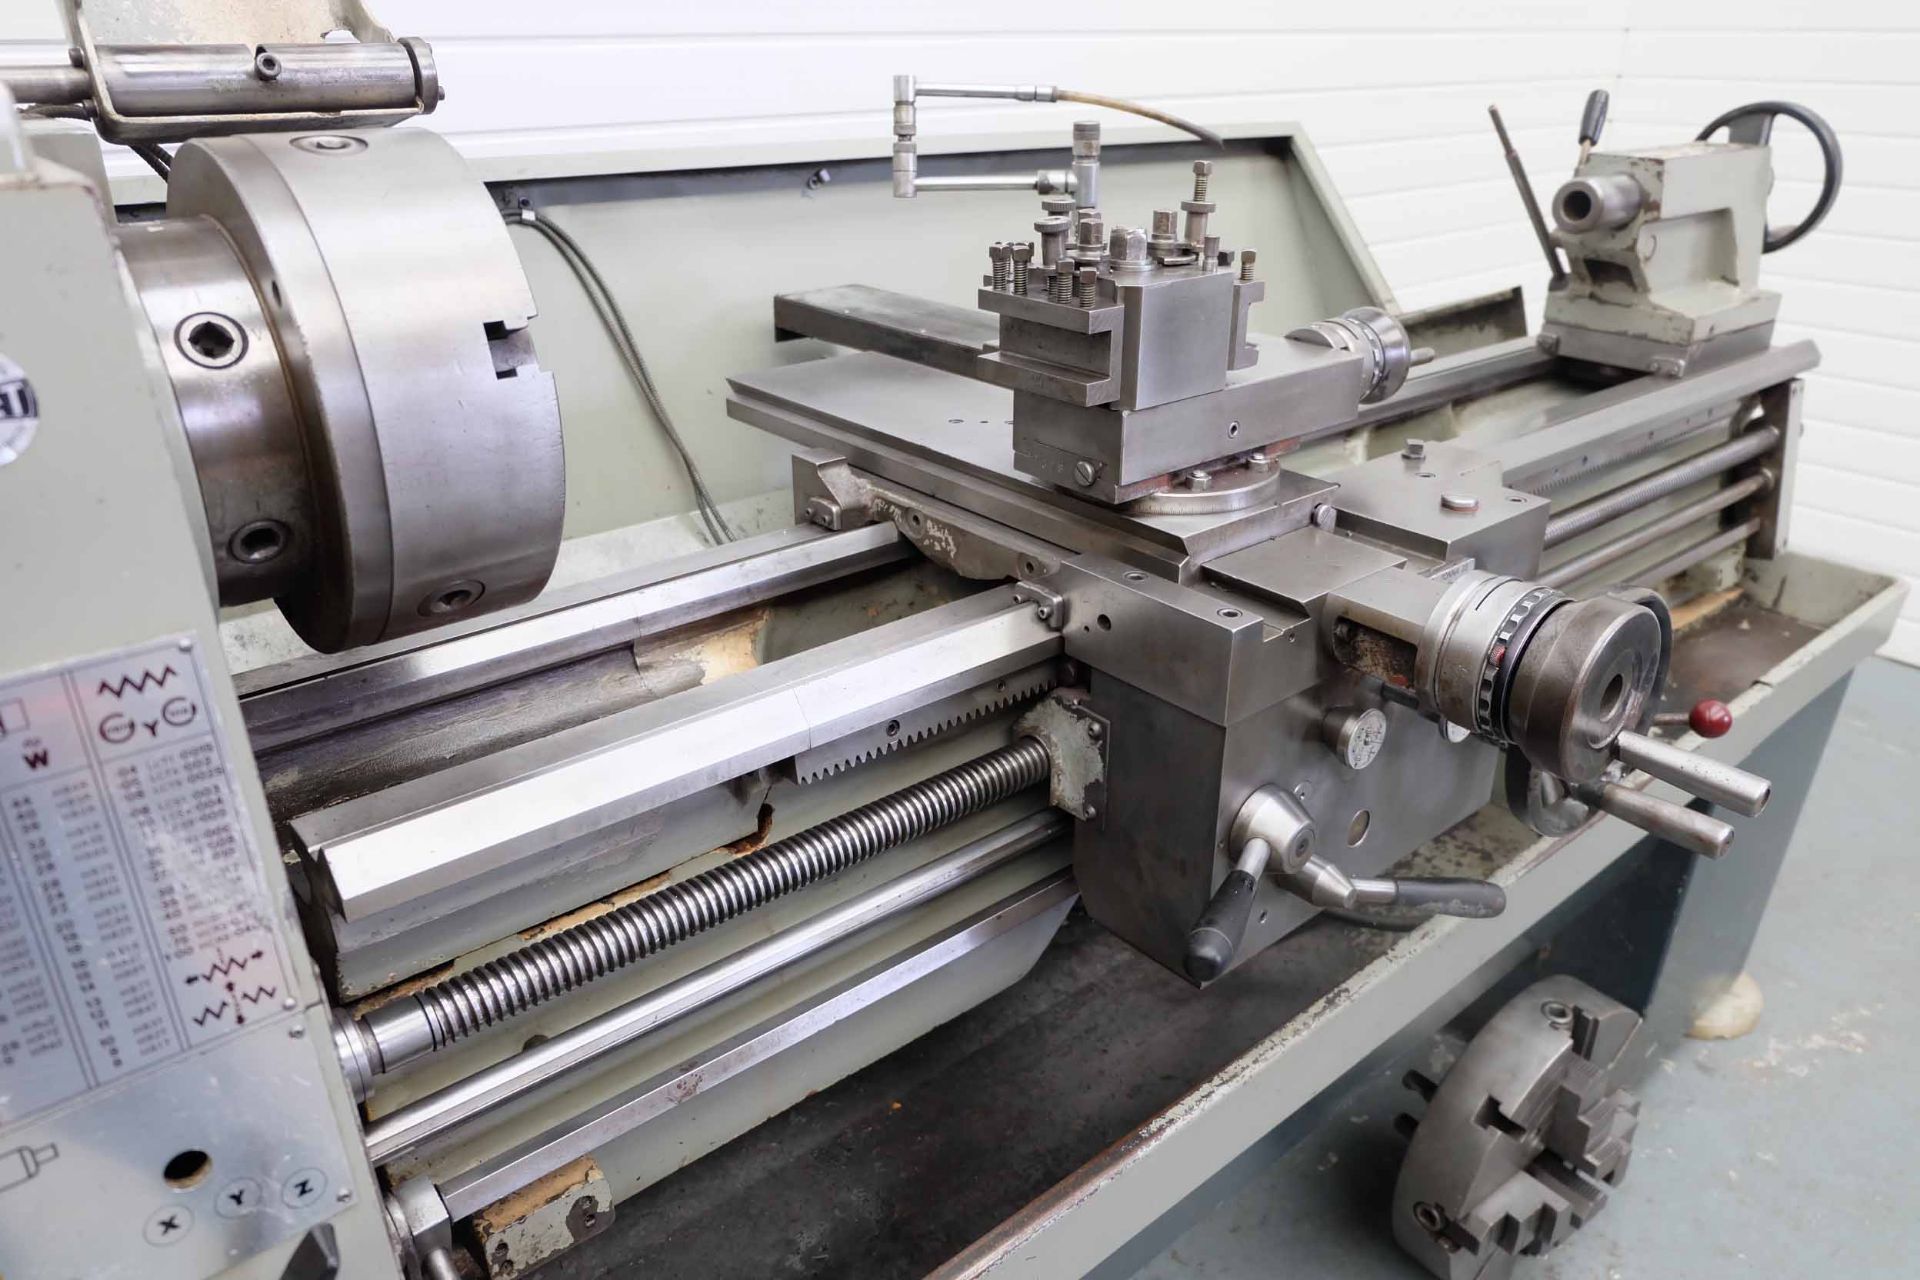 Colchester Triumph 2000 Gap Bed Centre Lathe. Admits Between Centres 50". Swing Over Bed 15 1/4". Sw - Bild 6 aus 10